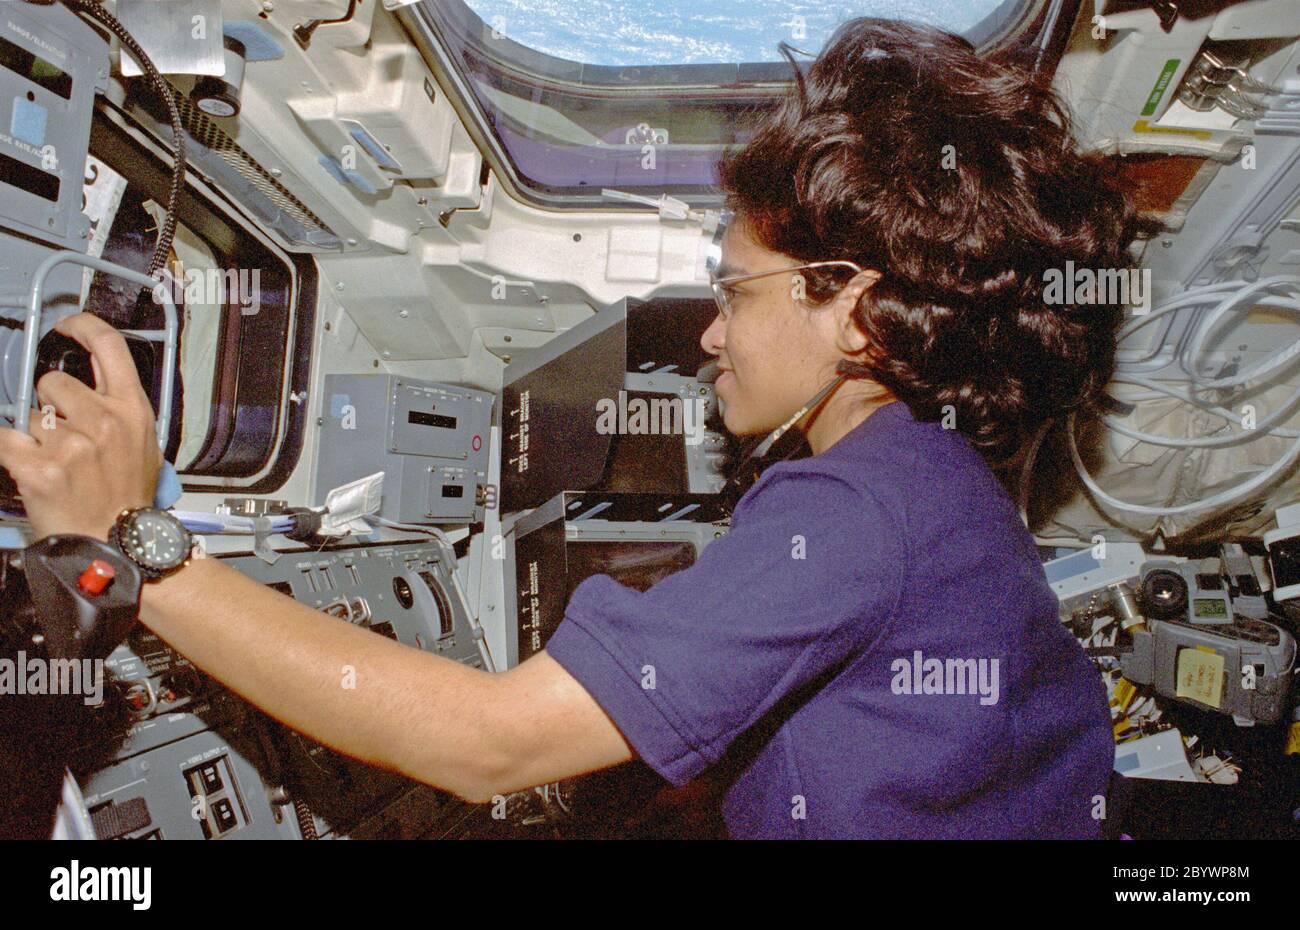 (19 November - 5 December 1997) --- Astronaut Kalpana Chawla, mission specialist, operates the Space Shuttle Columbia's Remote Manipulator System (RMS) on the aft flight deck during operations with the Spartan 201 satellite.  Kalpana Chawla joined four other astronauts and a Ukrainian payload specialist for 16-days of research in Earth-orbit in support of the United States Microgravity Payload 4 (USMP-4) mission.  The light blue and white colors associated with the crew's nearby home planet are visible in the overhead window. Stock Photo